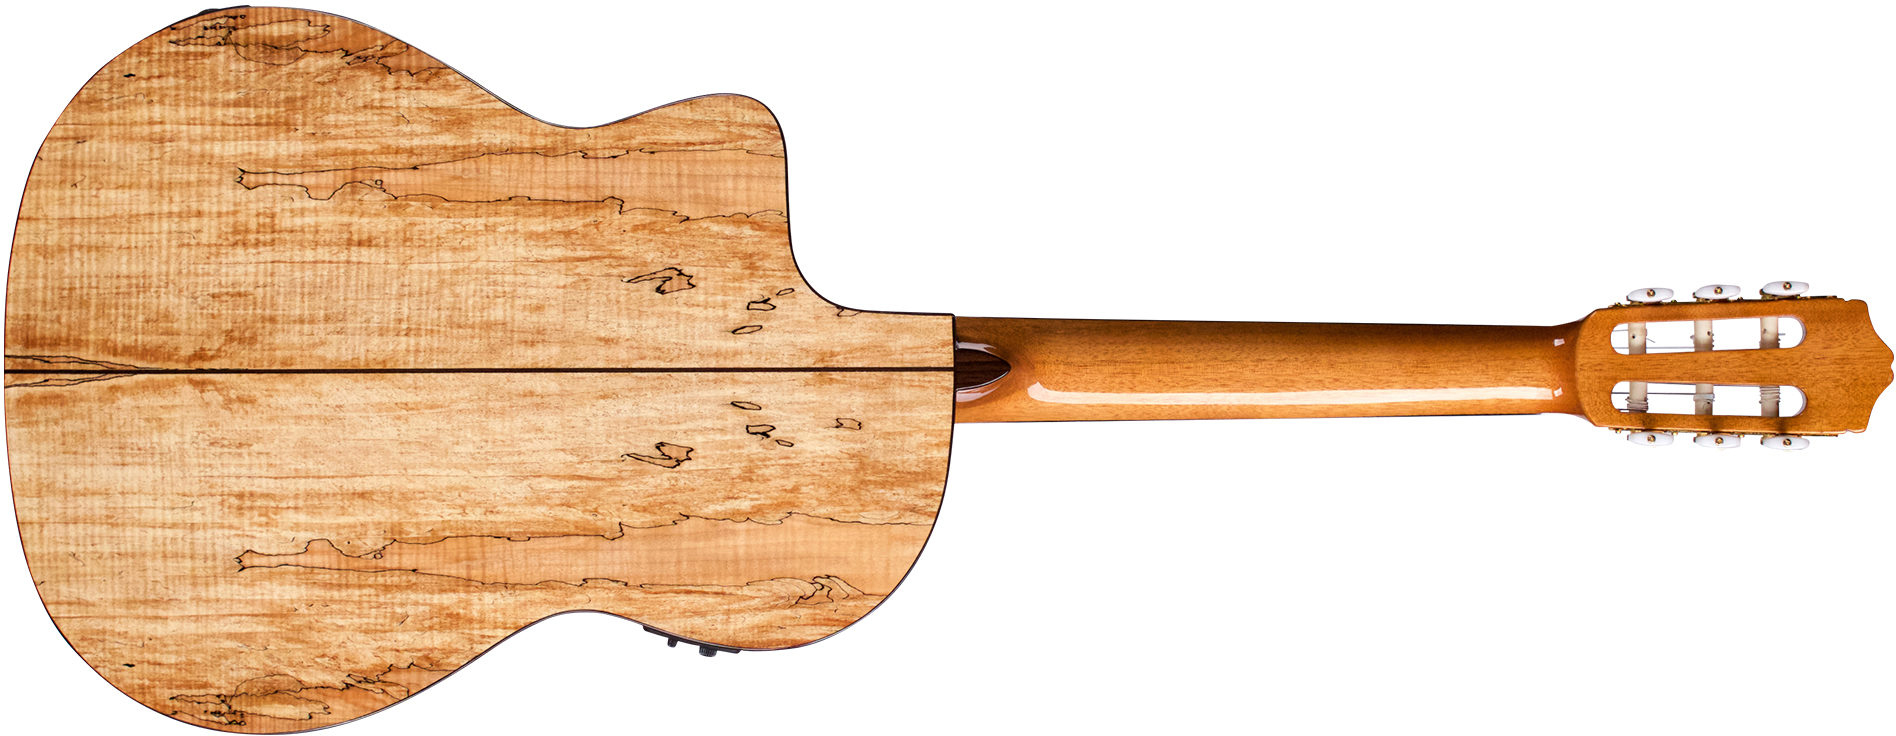 Cordoba C5 Cet Spalted Maple Limited Thinbody Cw Epicea Erable Pf - Natural - Guitare Classique Format 4/4 - Variation 1